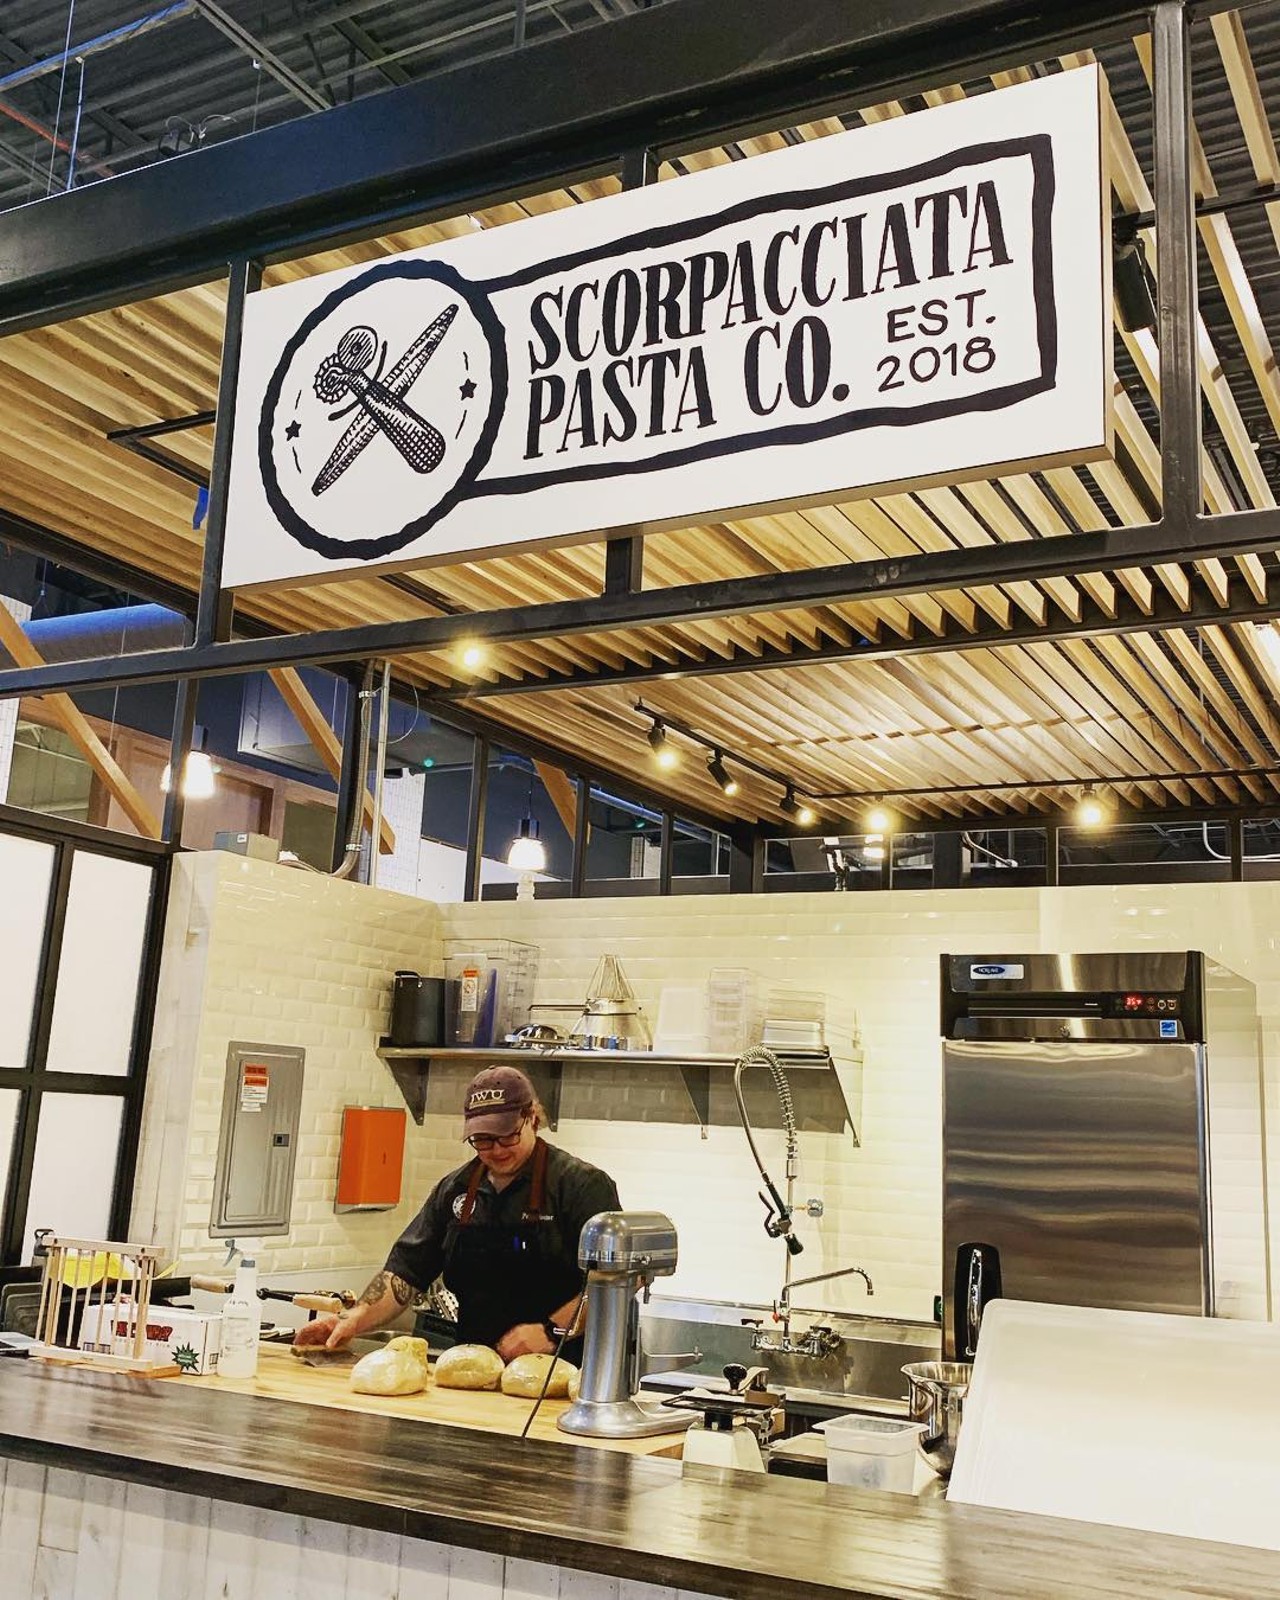  Scorpacciata Pasta Co.
3441 Tuttle Rd., Shaker Heights
In addition to all of their fabulous homemade pastas, this stand located at the Van Aken Food Hall is offering pizzas and family style lasagna pans. You can get a cheese lasagna pan for $35 or meat for $45.
Photo via Scorpacciata Pasta Co./Facebook